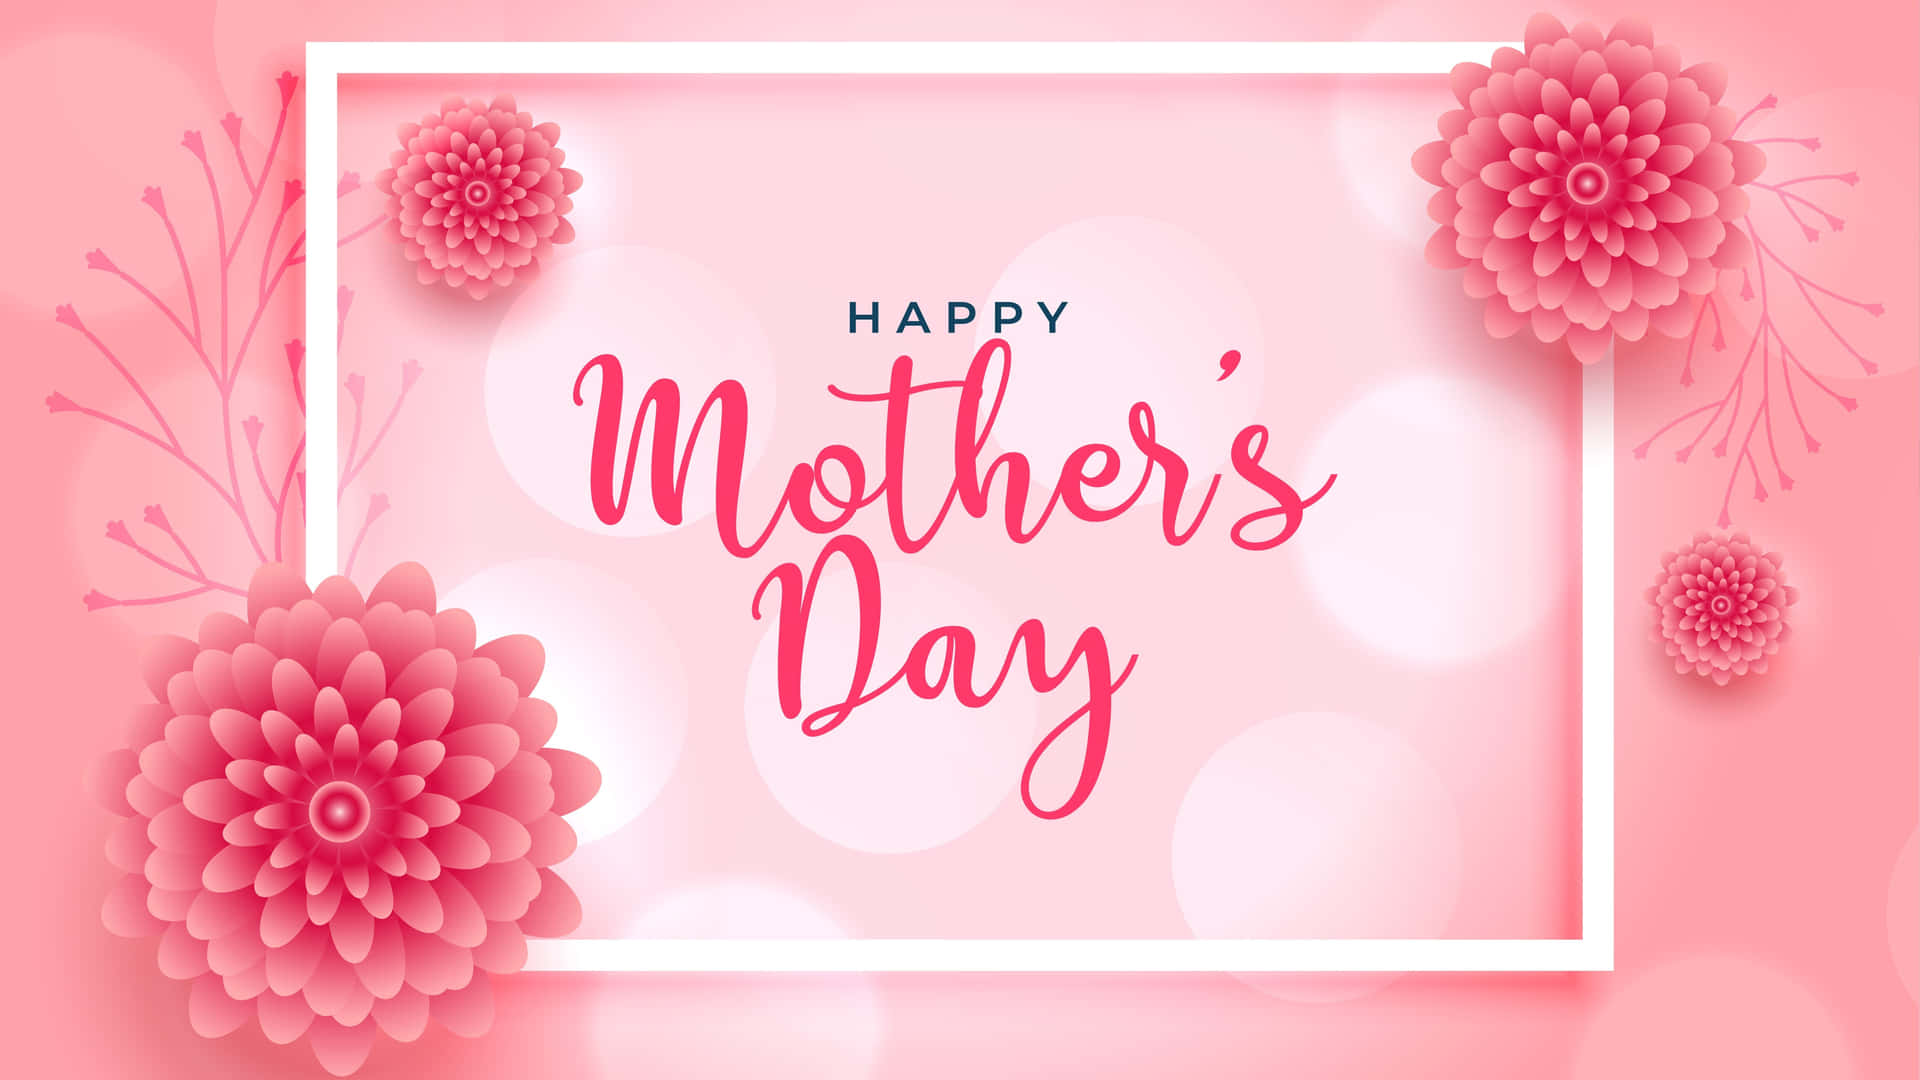 Happy Mother's Day Images With Flowers